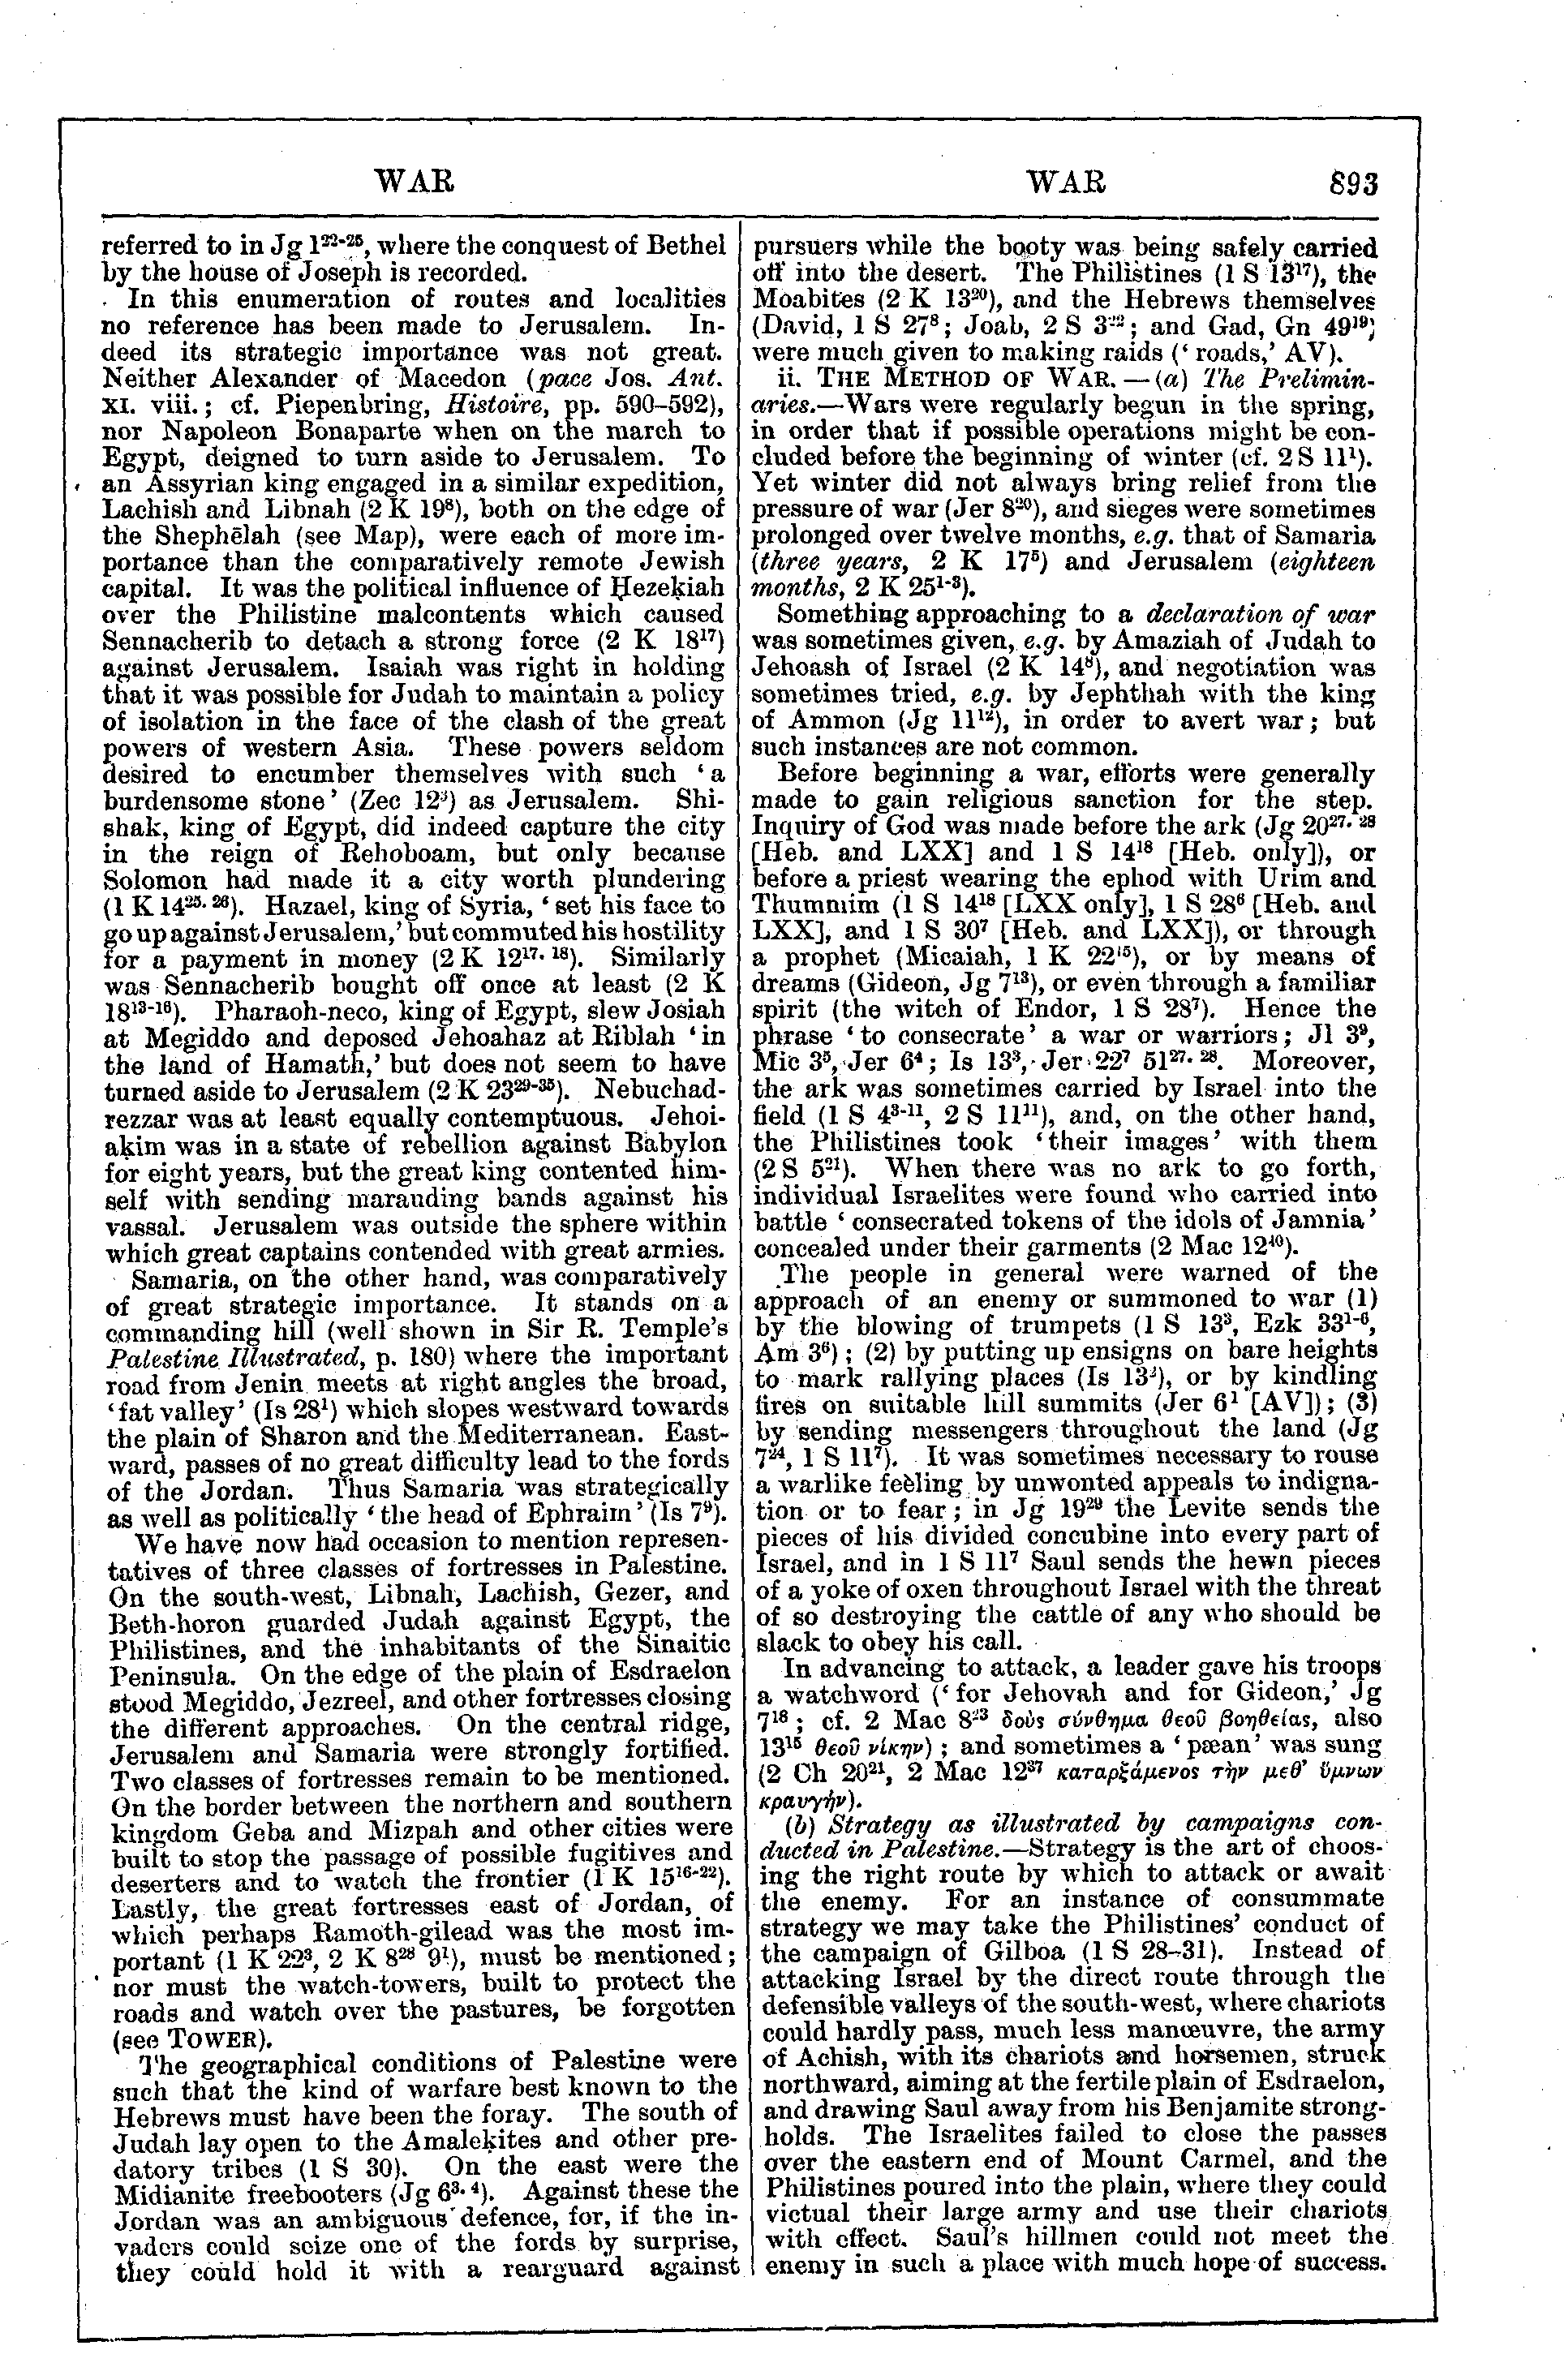 Image of page 893